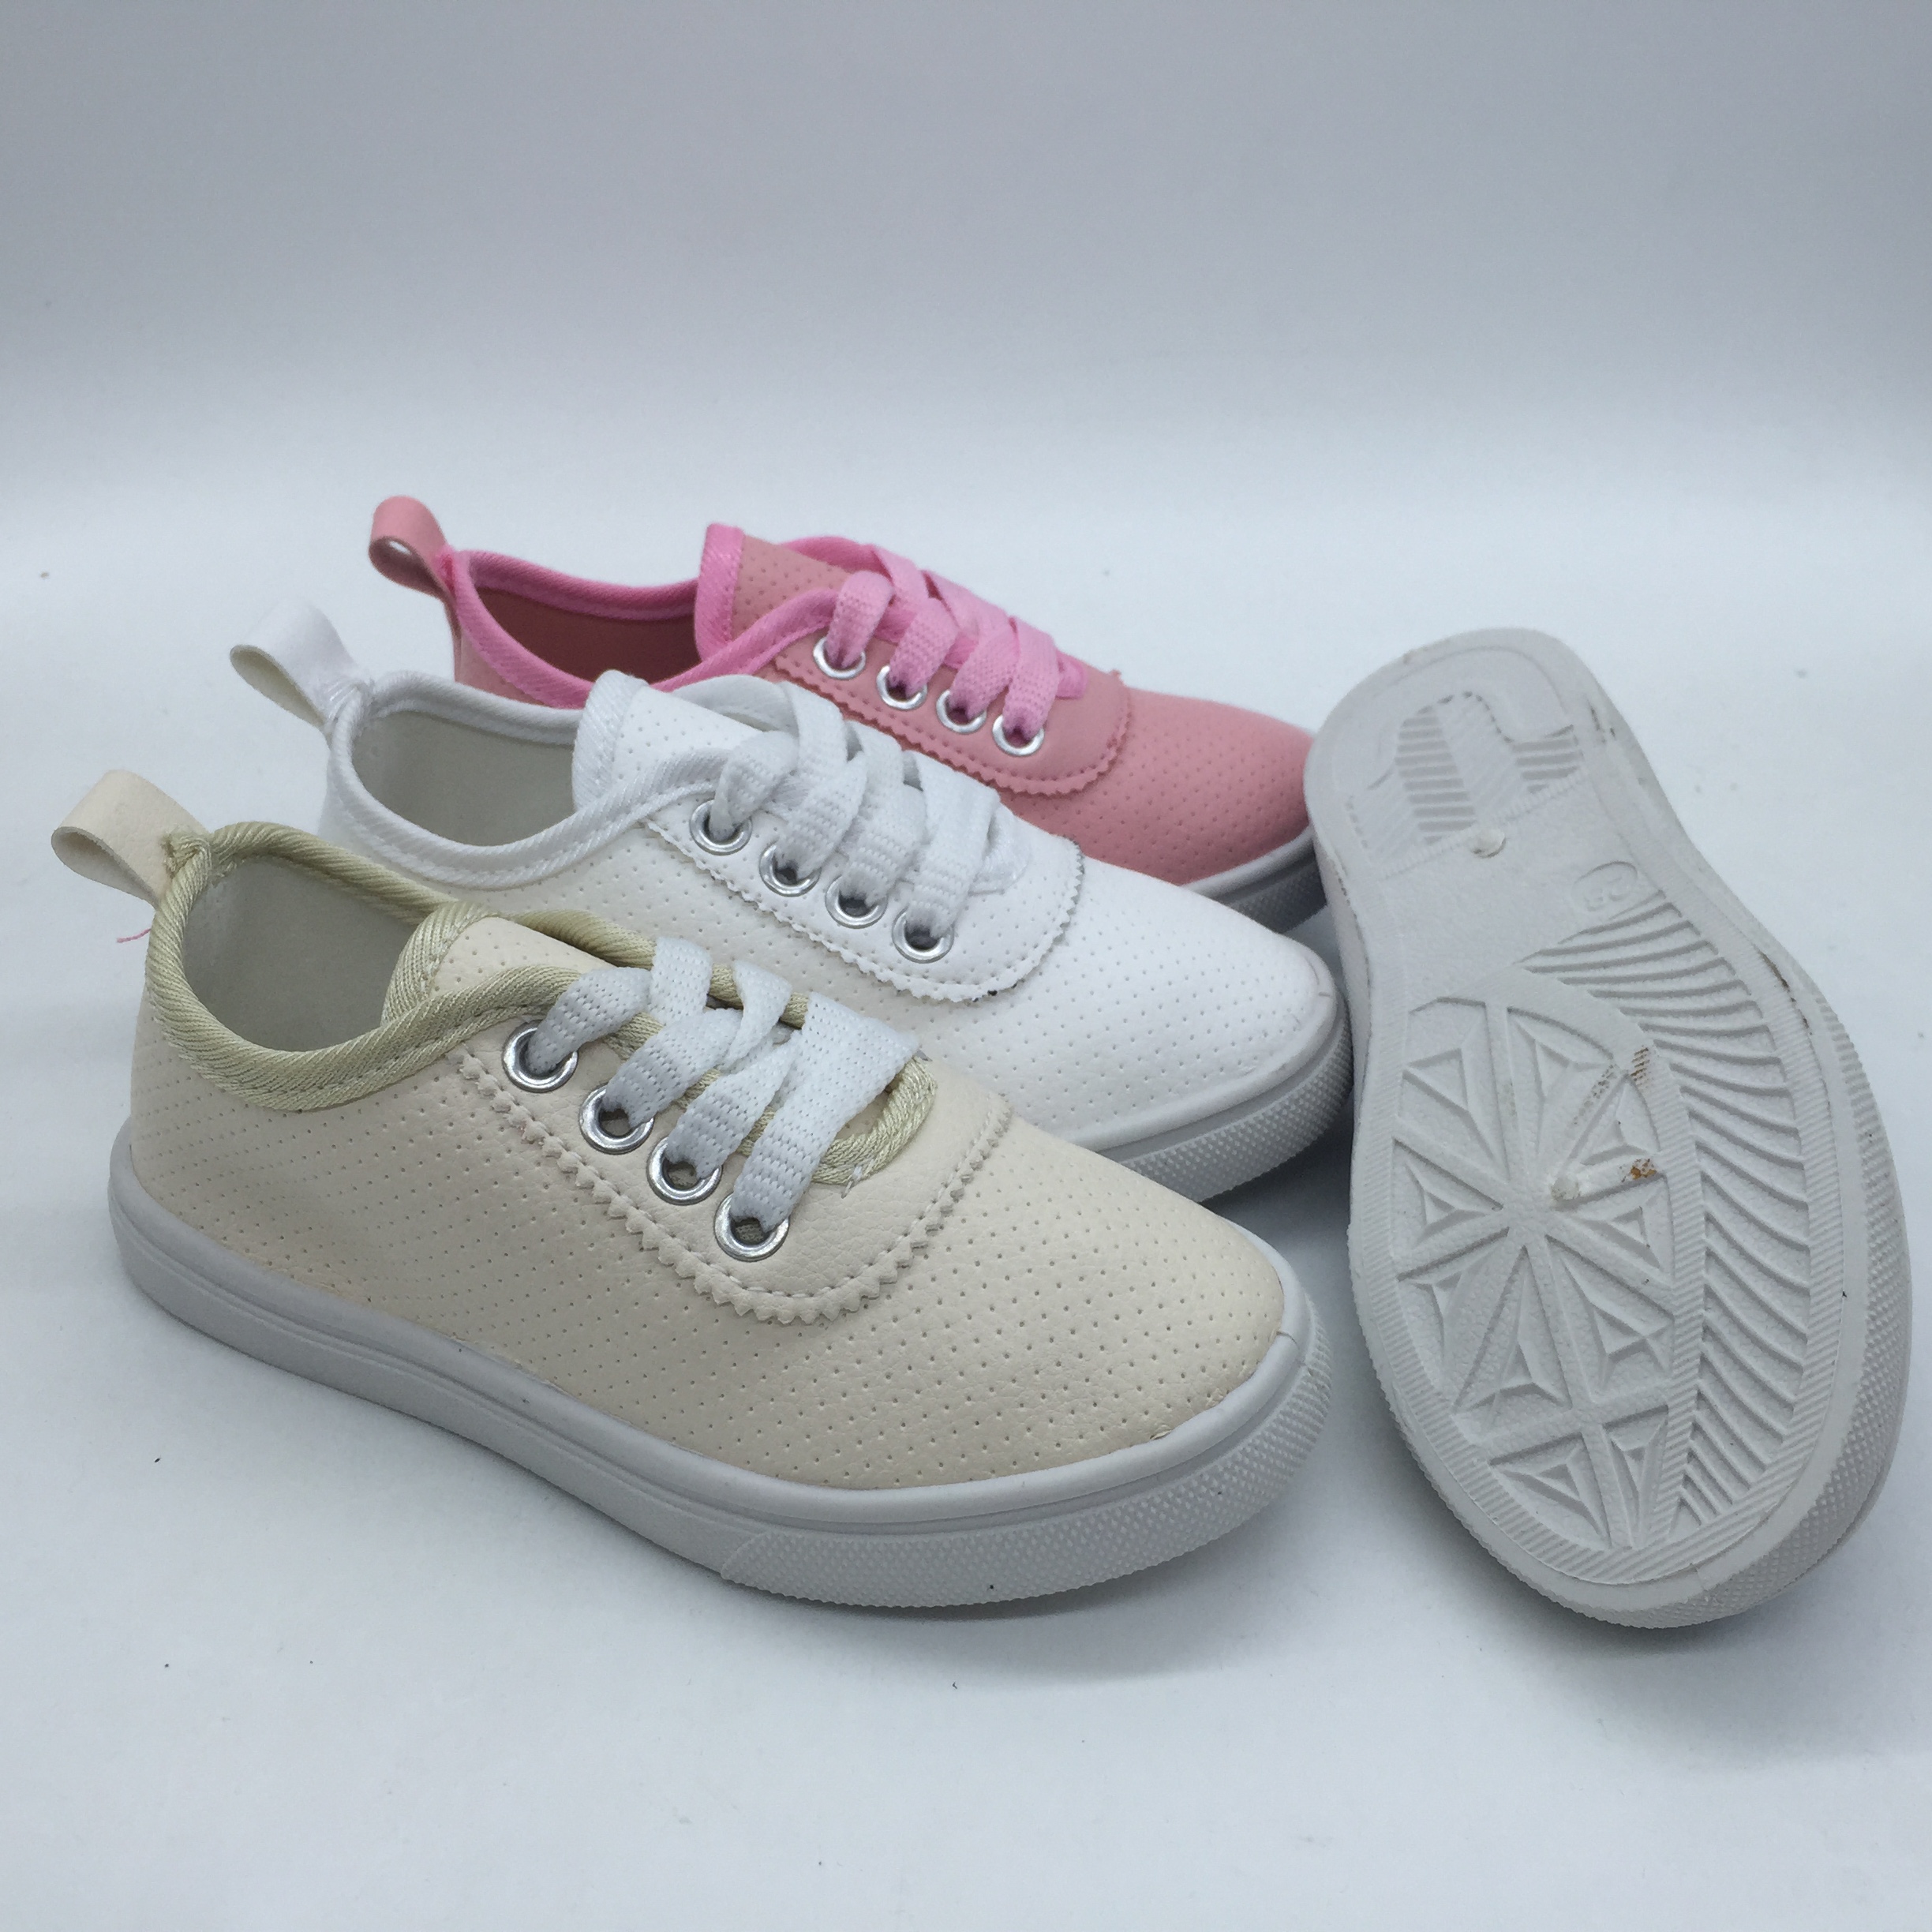 Latest design injection canvas shoes casual shoes kid shoes...